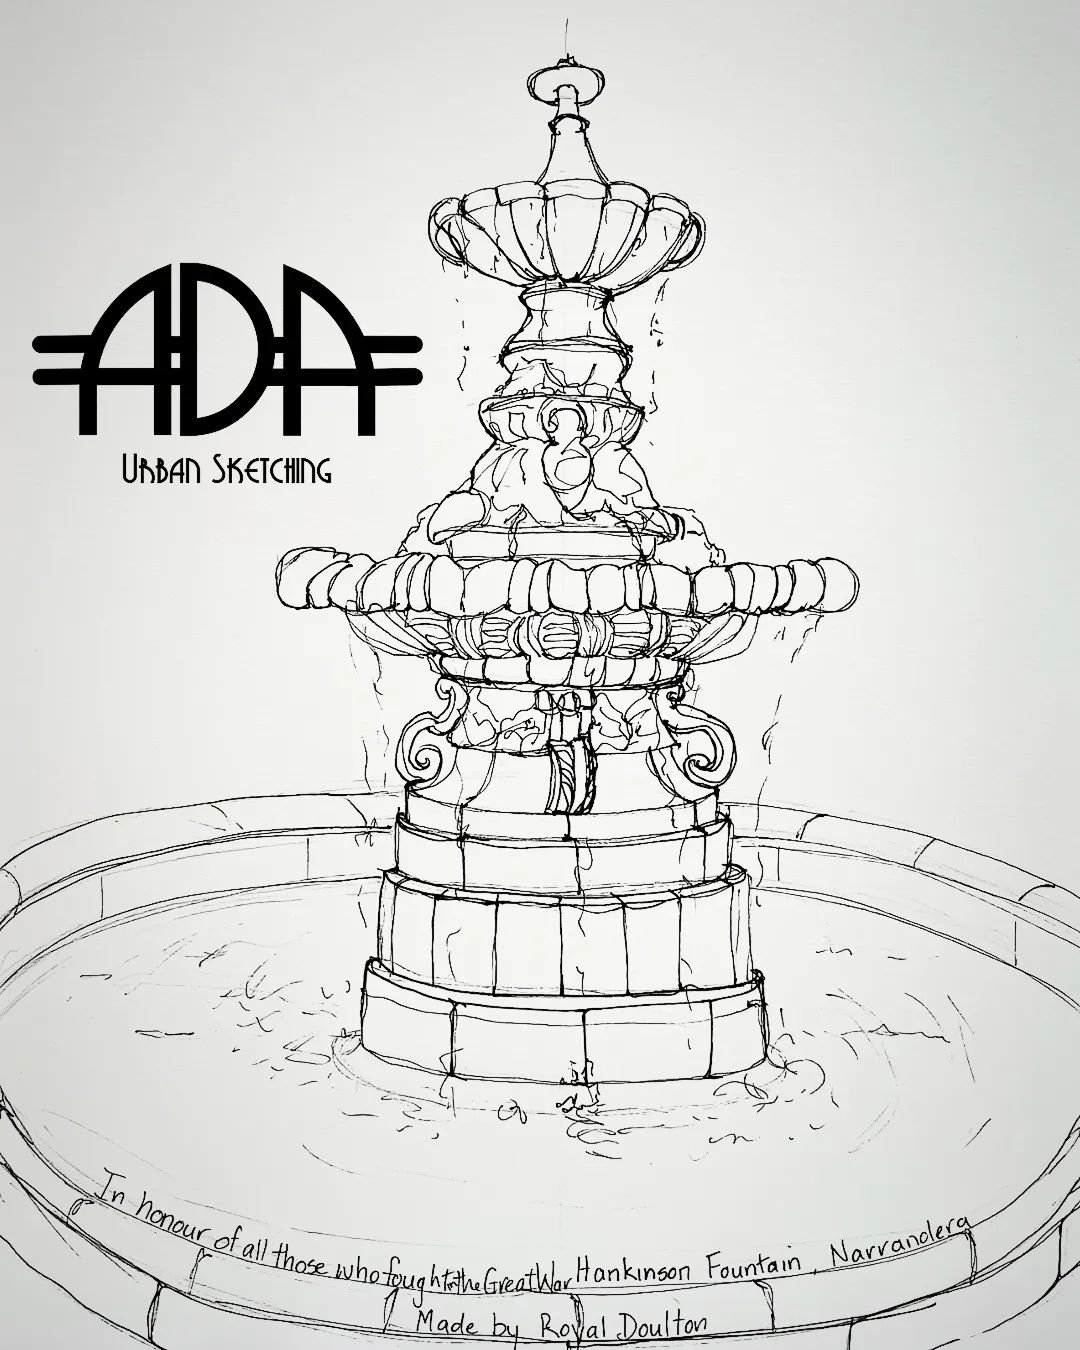 After an enjoyable sketching session at the Histroric Hydro, we are pleased to hold our next ADA Urban Sketching event on Sunday May 19 at the Narrandera Memorial Gardens, Victoria Square, Narrandera. Start time is 9:30am through to 11:30am. 

The Na